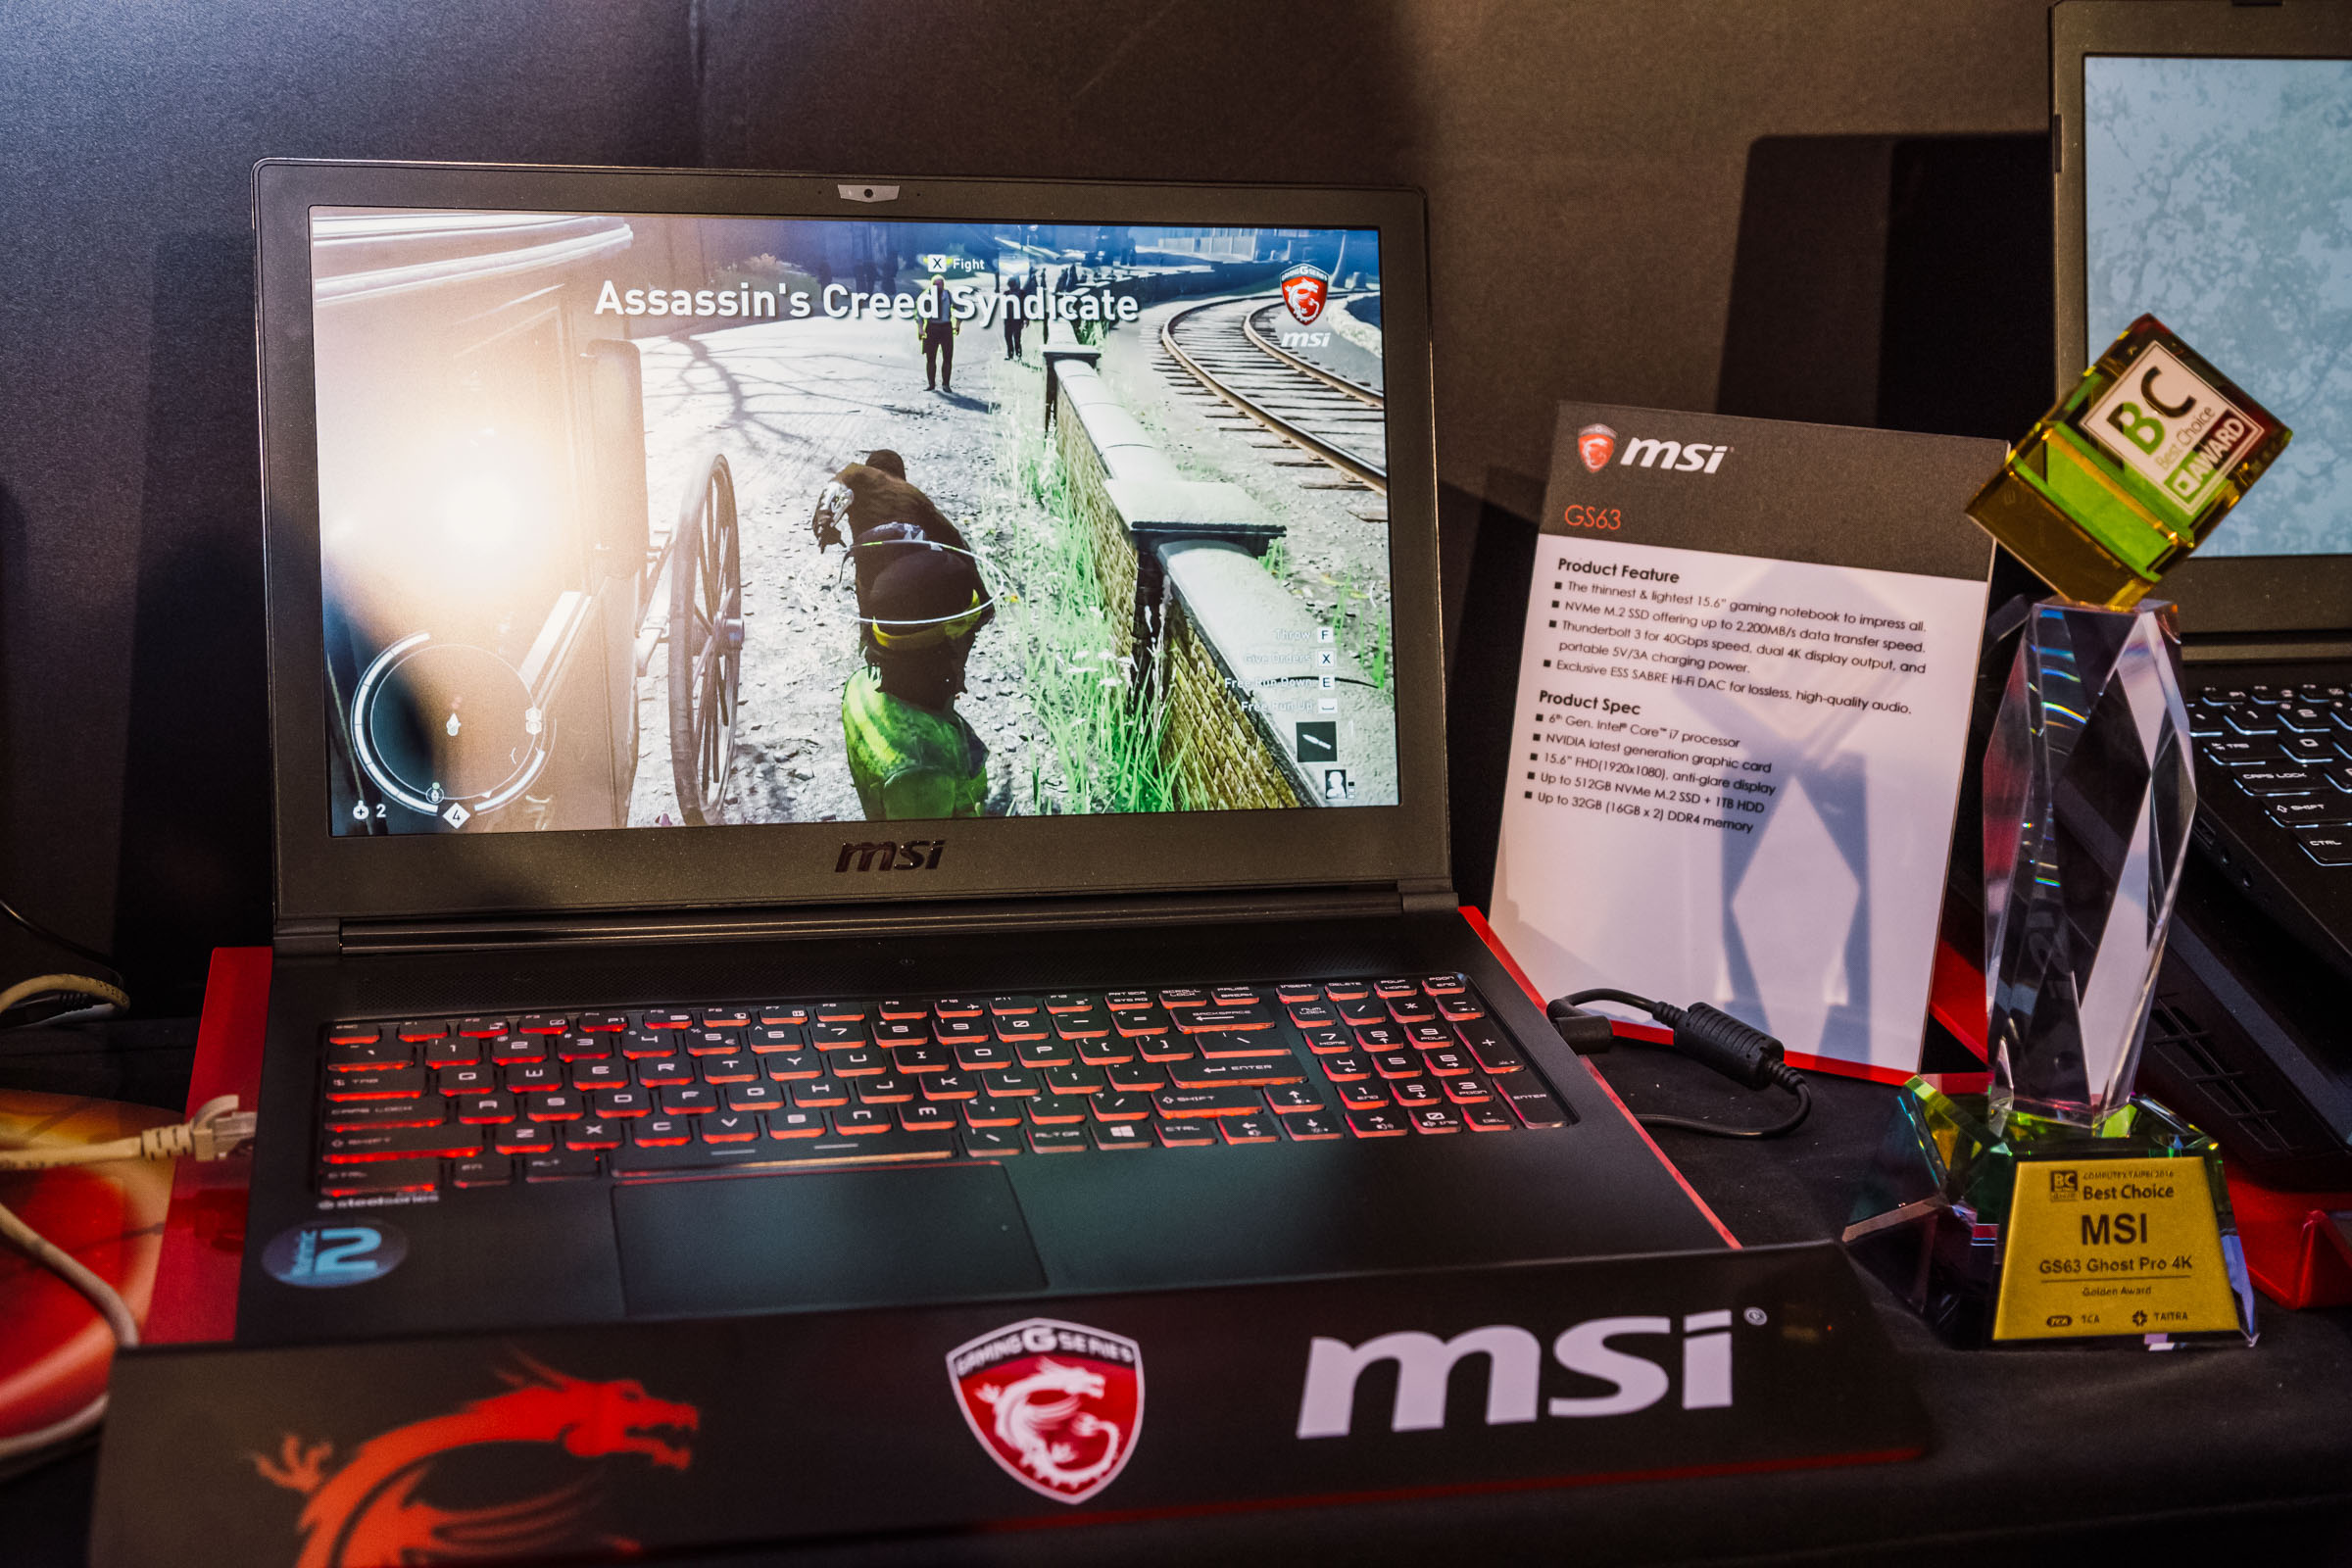 The new MSI GS63